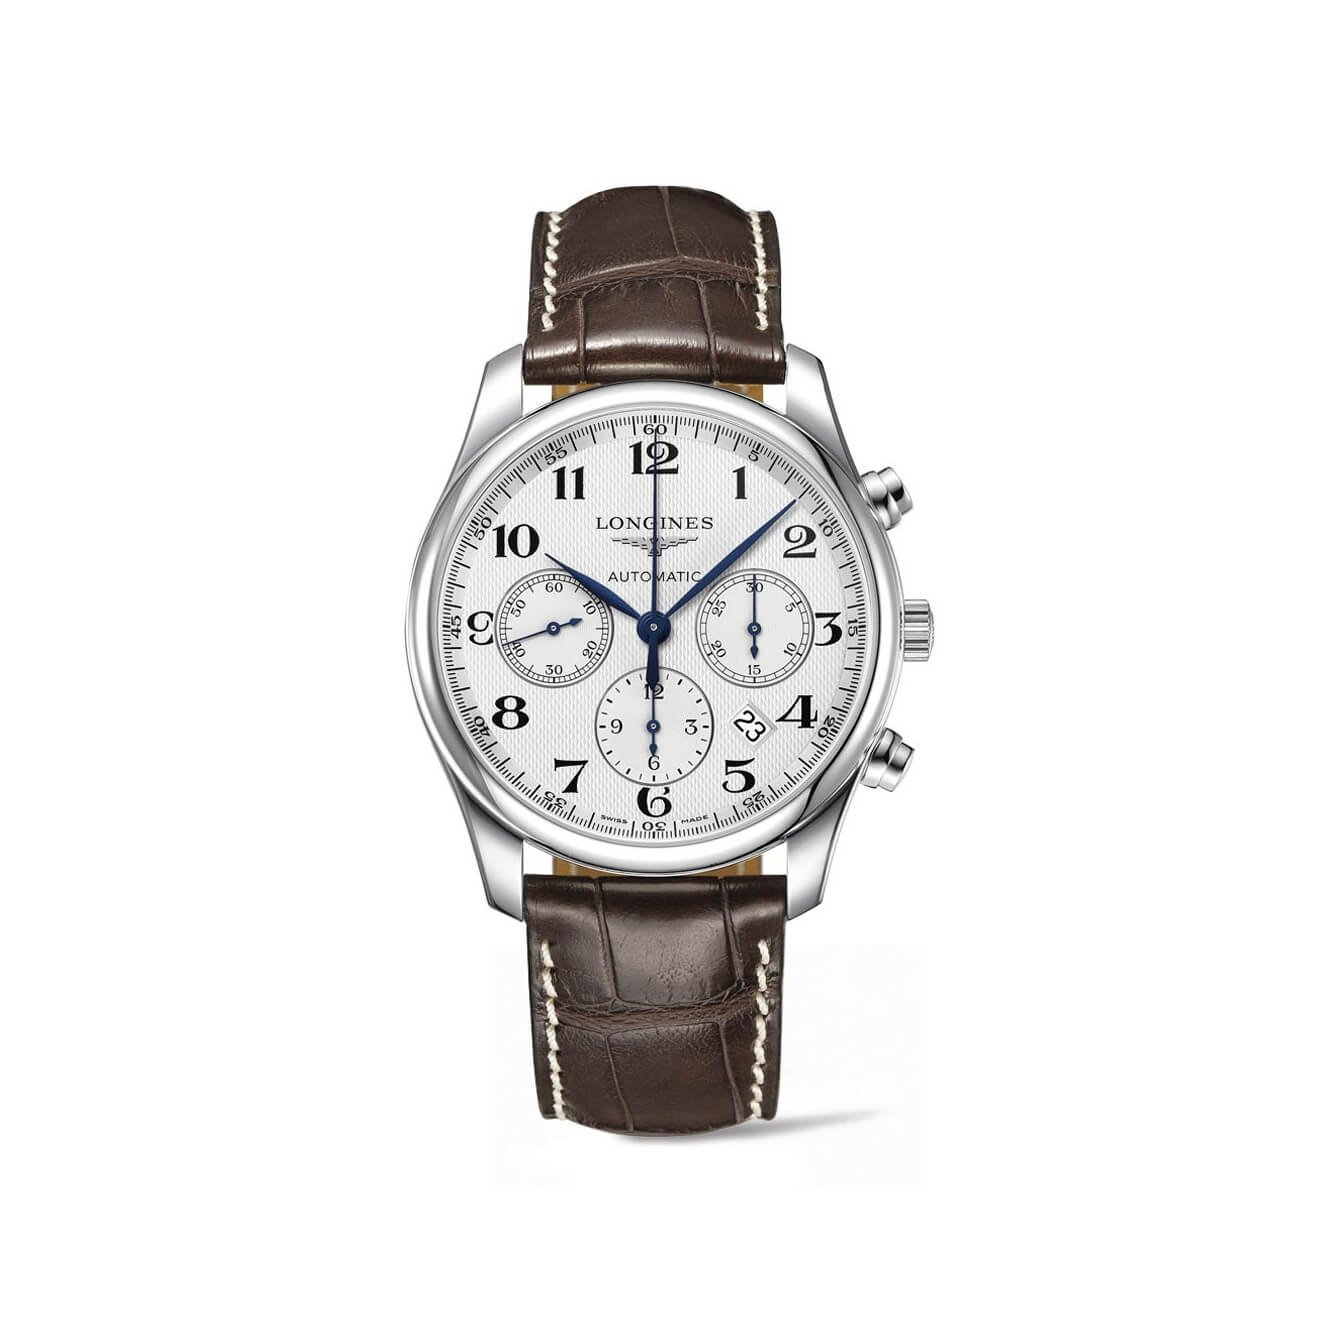 The Longines Master Collection 42 mm 